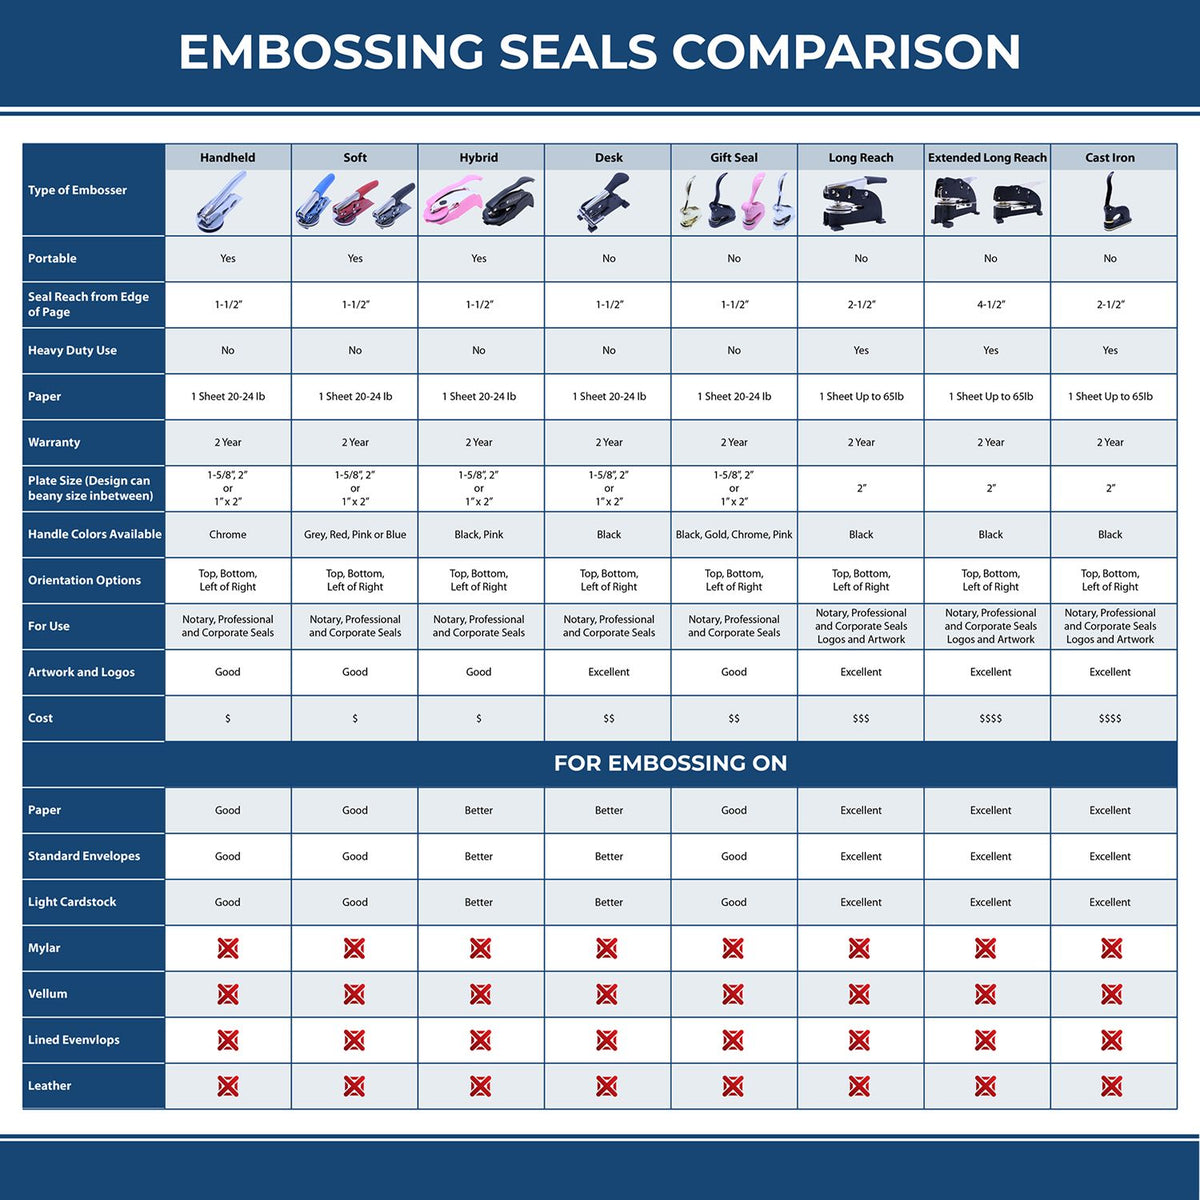 A comparison chart for the different types of mount models available for the Heavy Duty Cast Iron Florida Geologist Seal Embosser